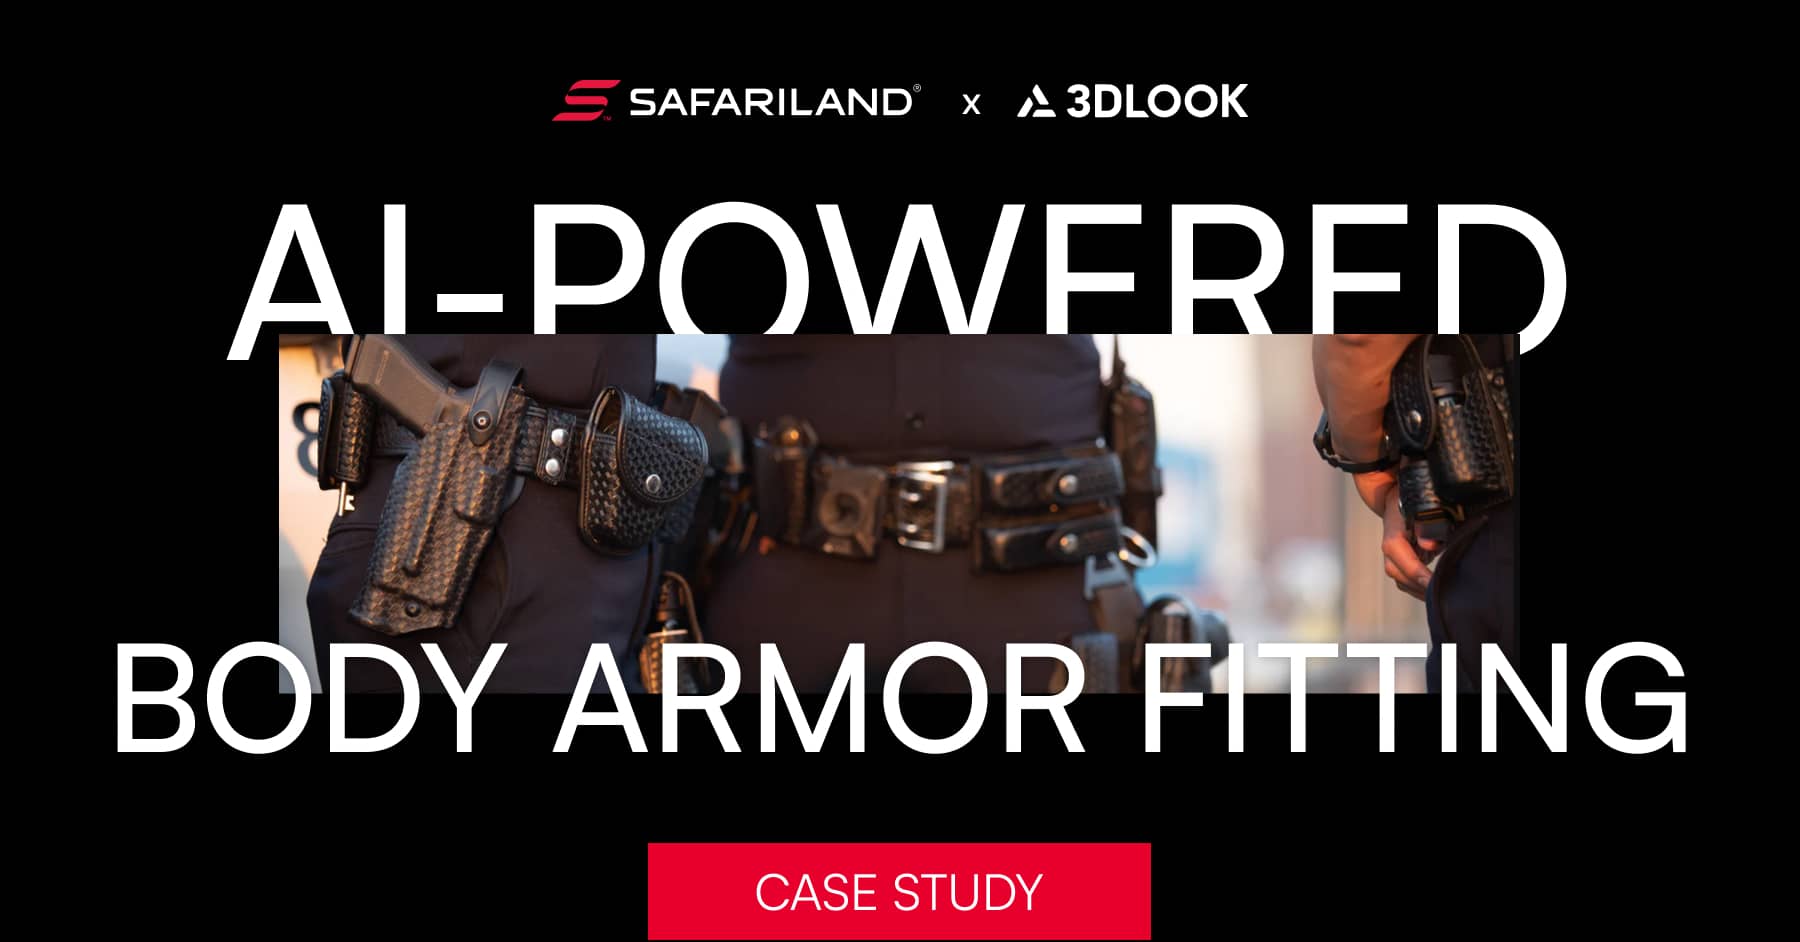 Promotional material for AI-powered mobile body scanning for body armor fitting by The Safariland Group in collaboration with 3DLOOK.